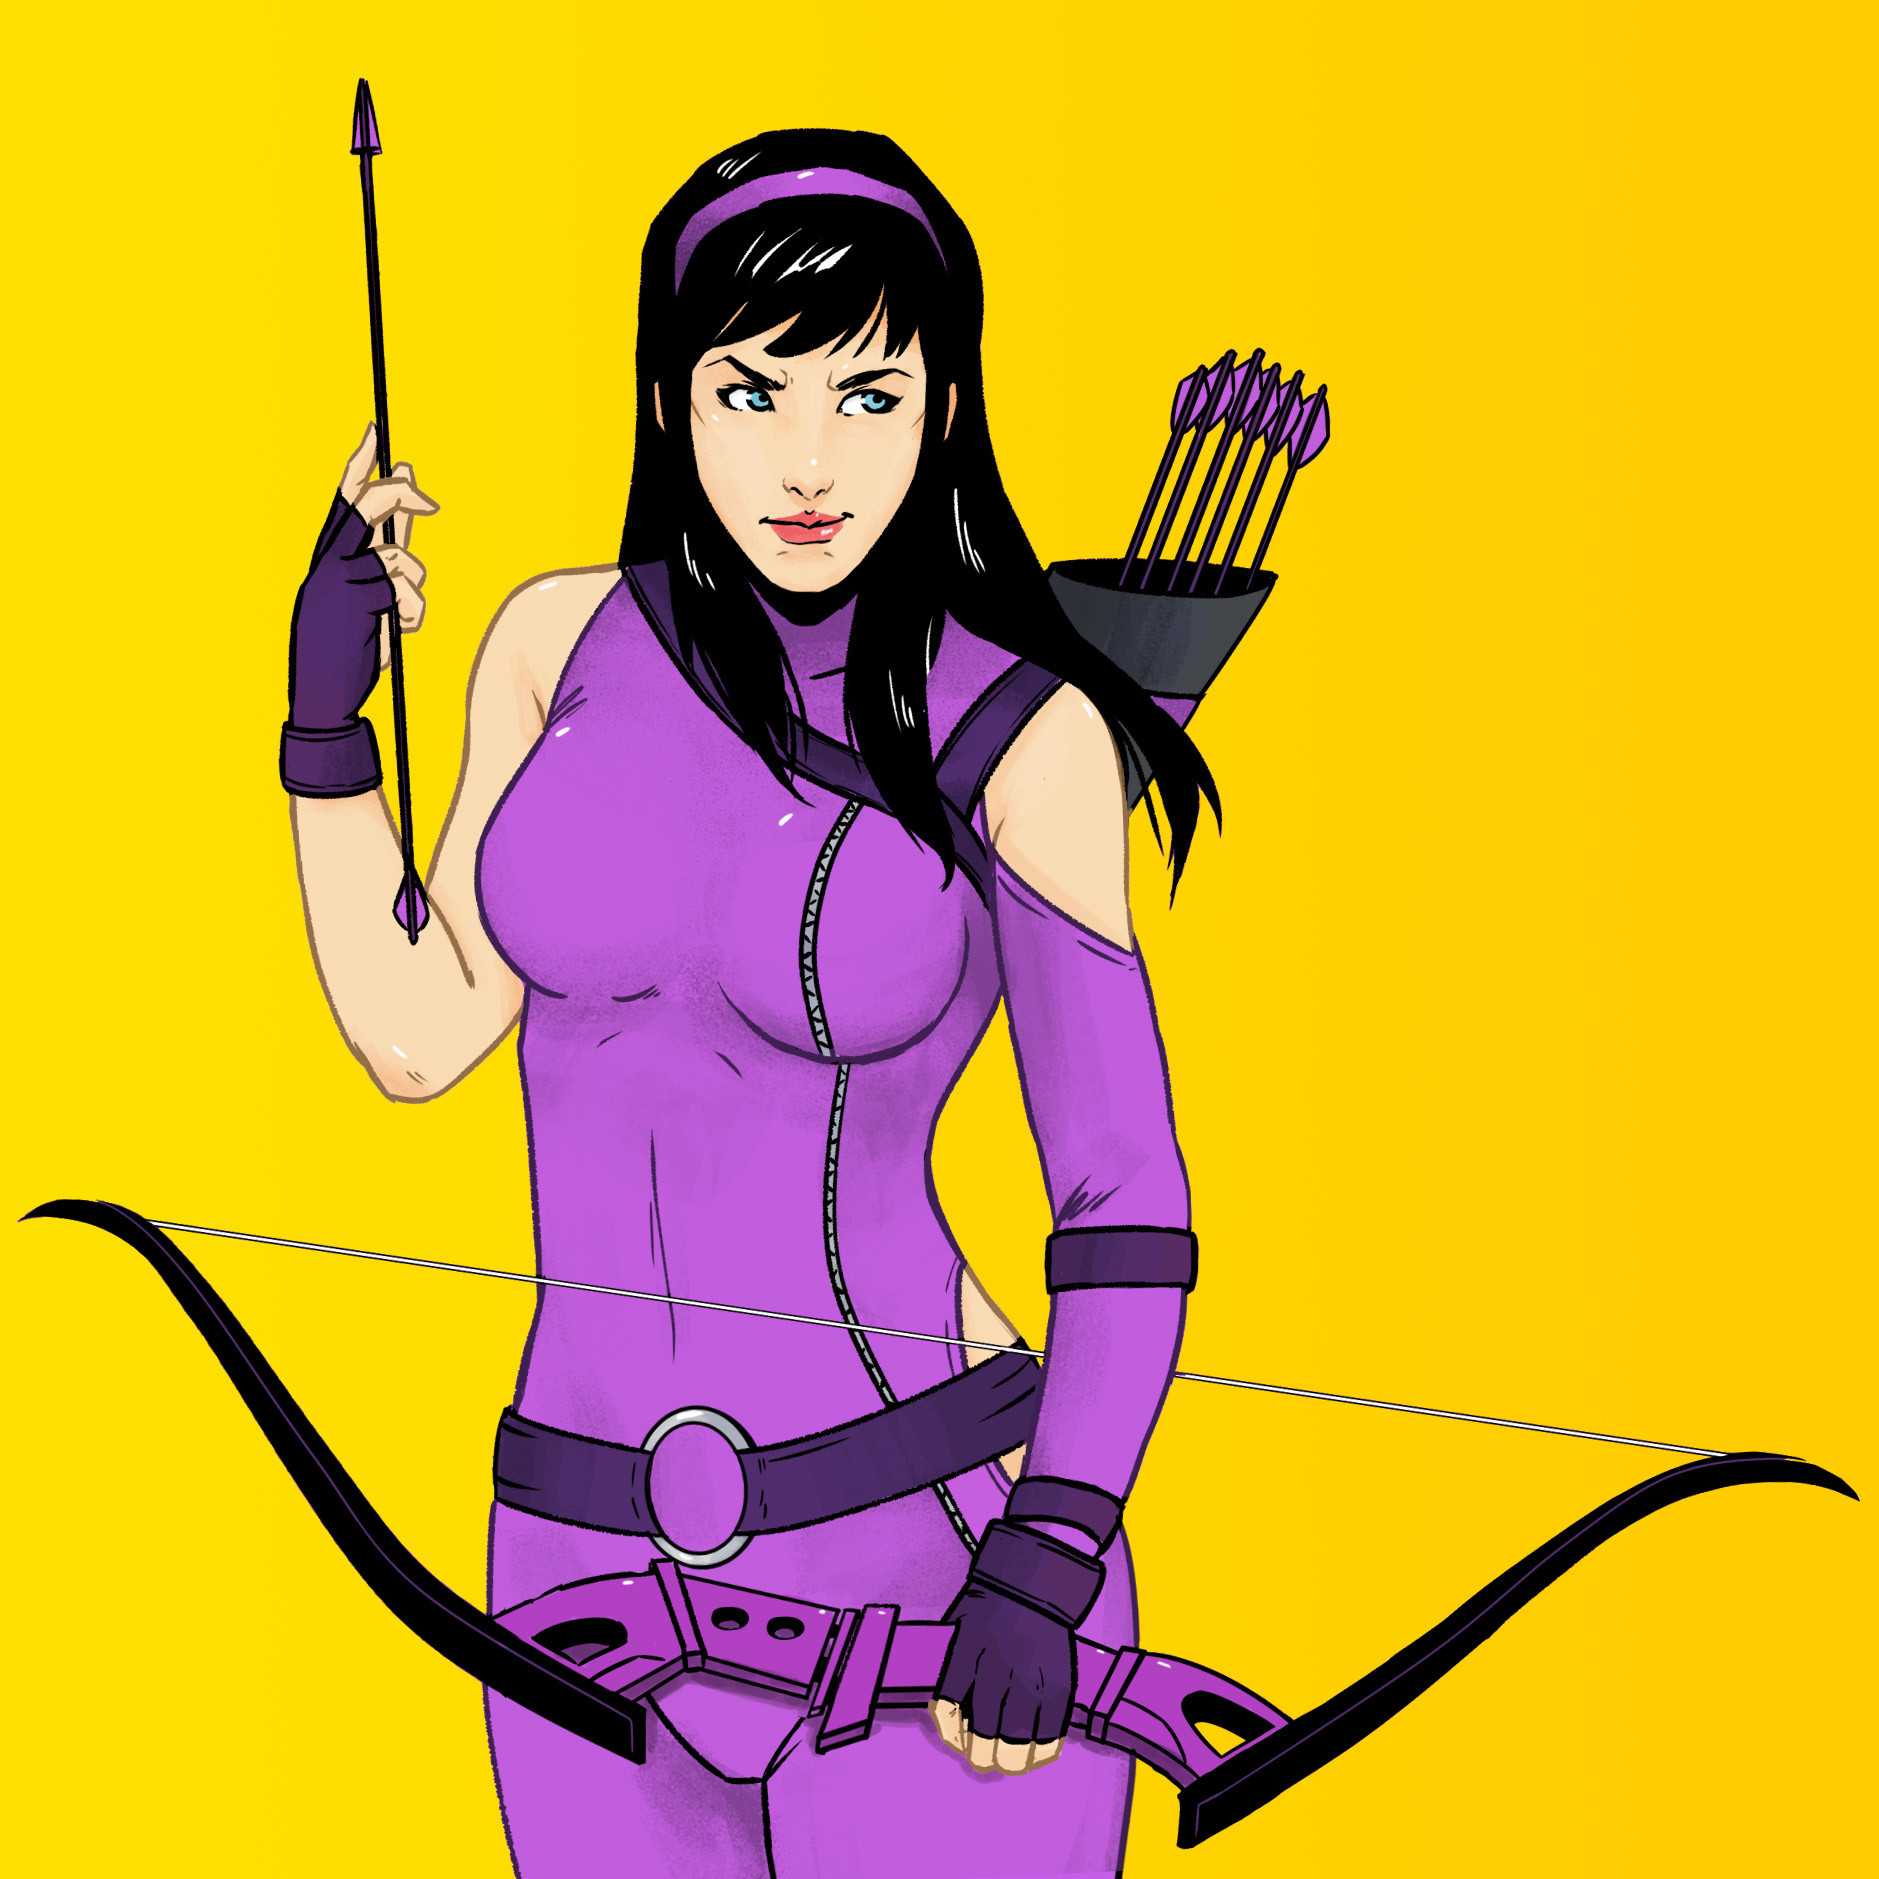 51 Hot Pictures Of Hawkeye Demonstrate That She Has Most Sweltering Legs | Best Of Comic Books